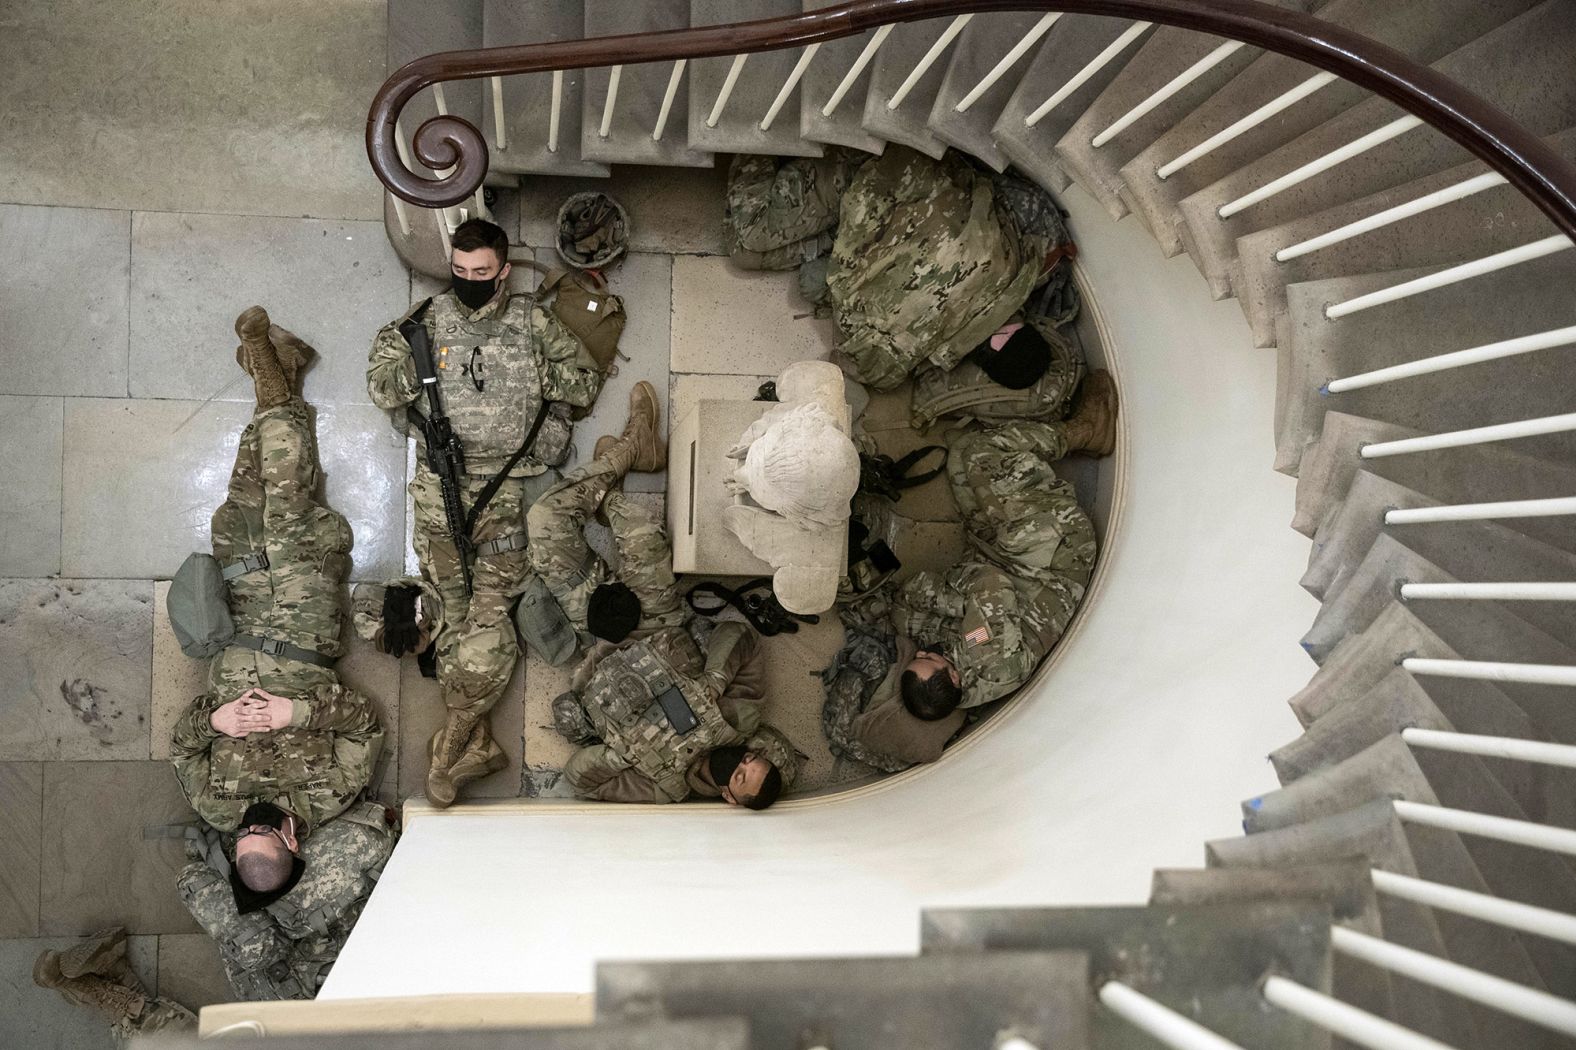 Members of the National Guard rest near a staircase in the Capitol on January 13. Thousands of National Guard troops were guarding every nook of the Capitol complex ahead of Joe Biden's inauguration.